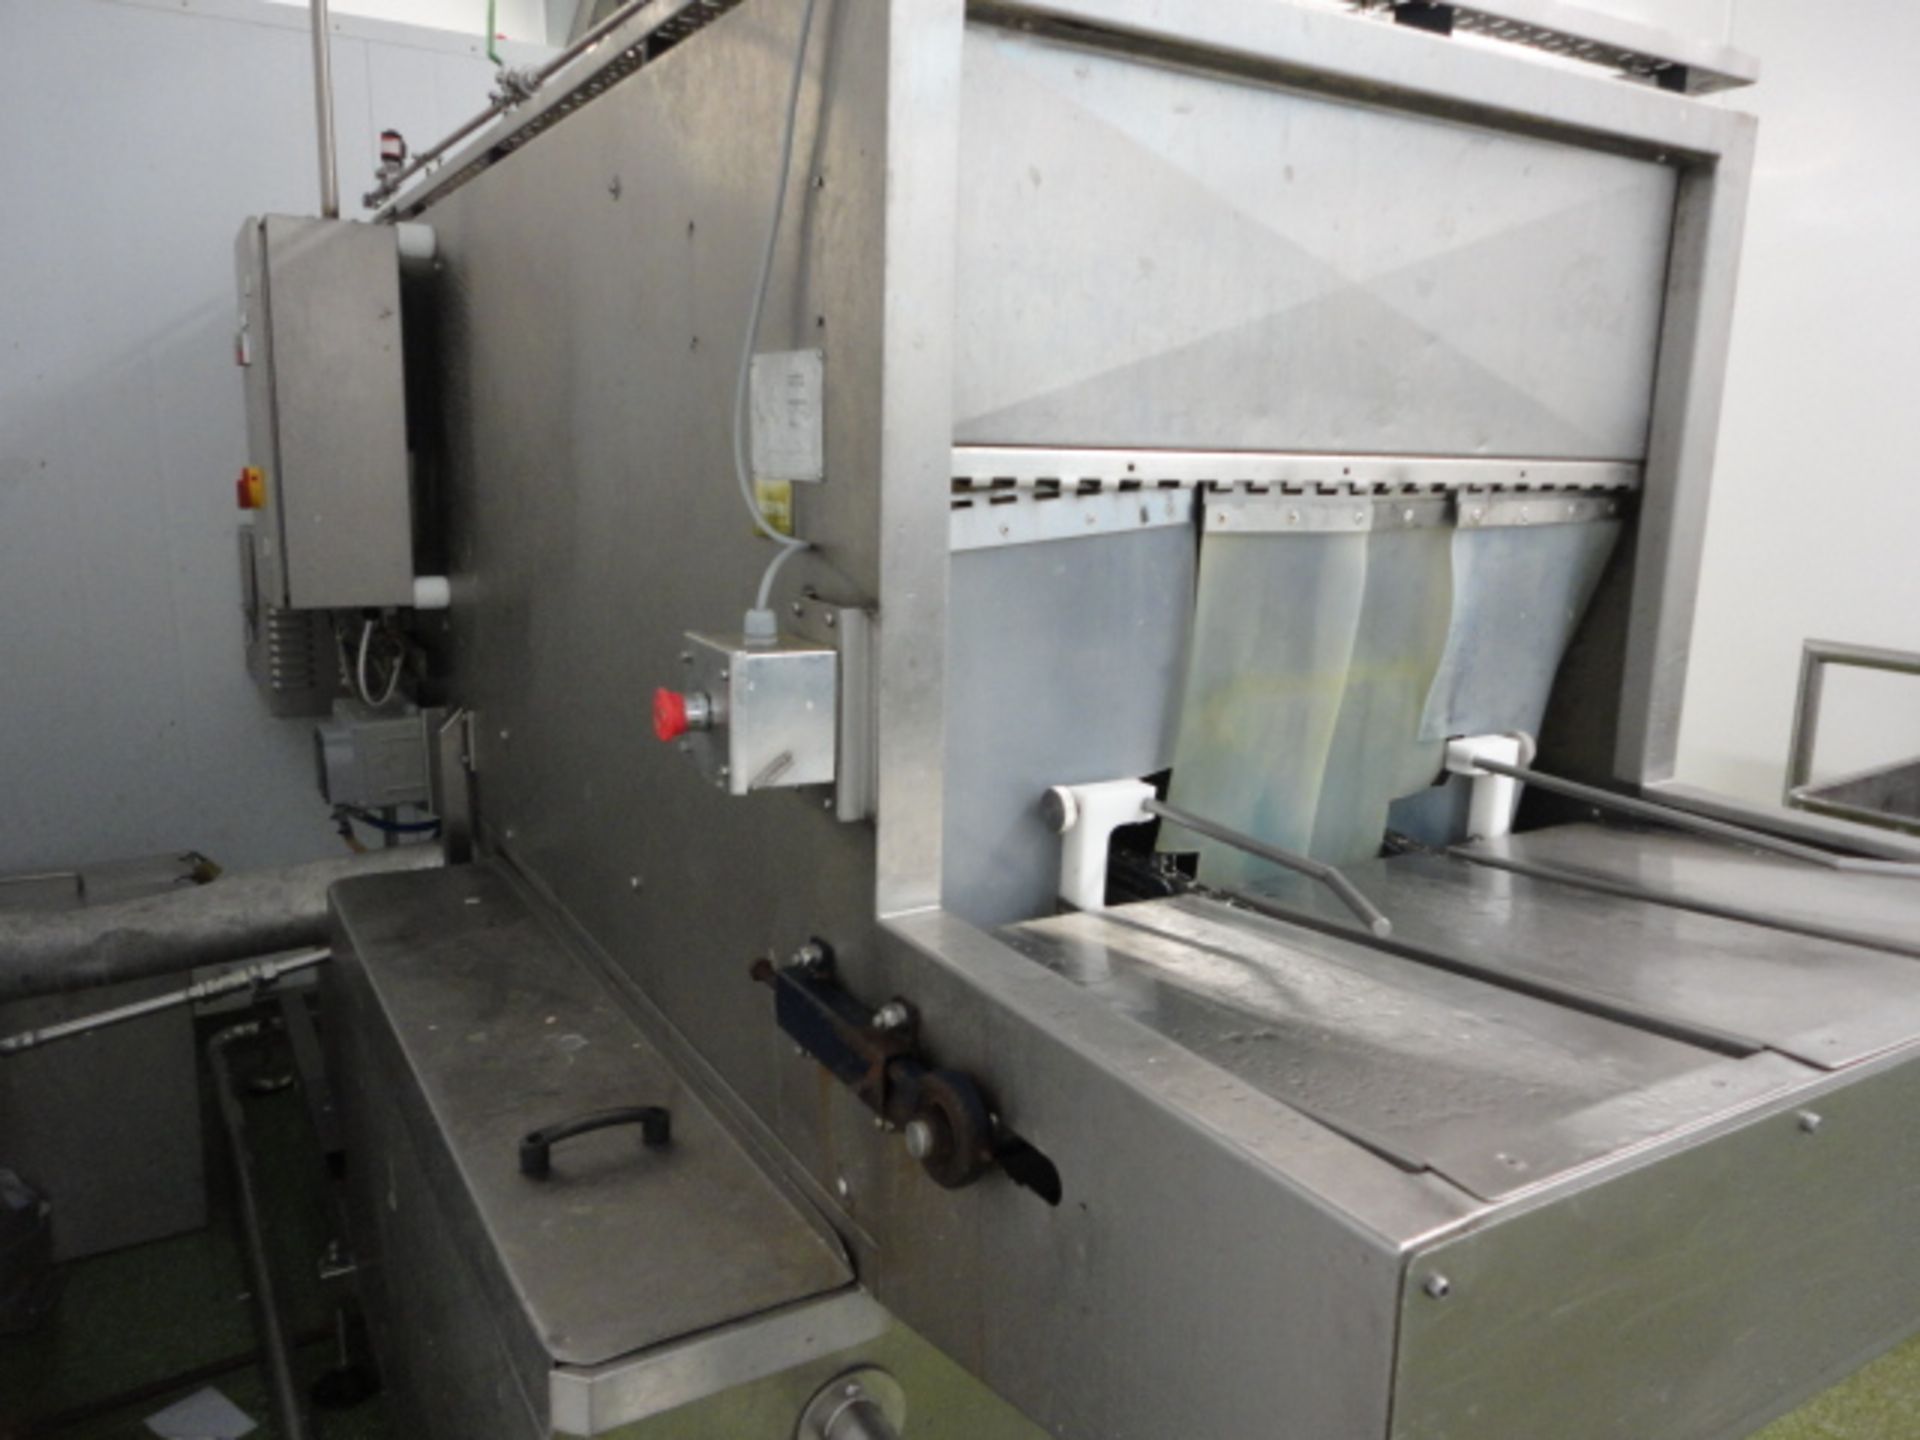 IWM TRAY WASHER CRUSADER ELECTRIC, DOSING UNIT DRY STATION, ALLS/S. LIFT OUT £40. - Image 2 of 2